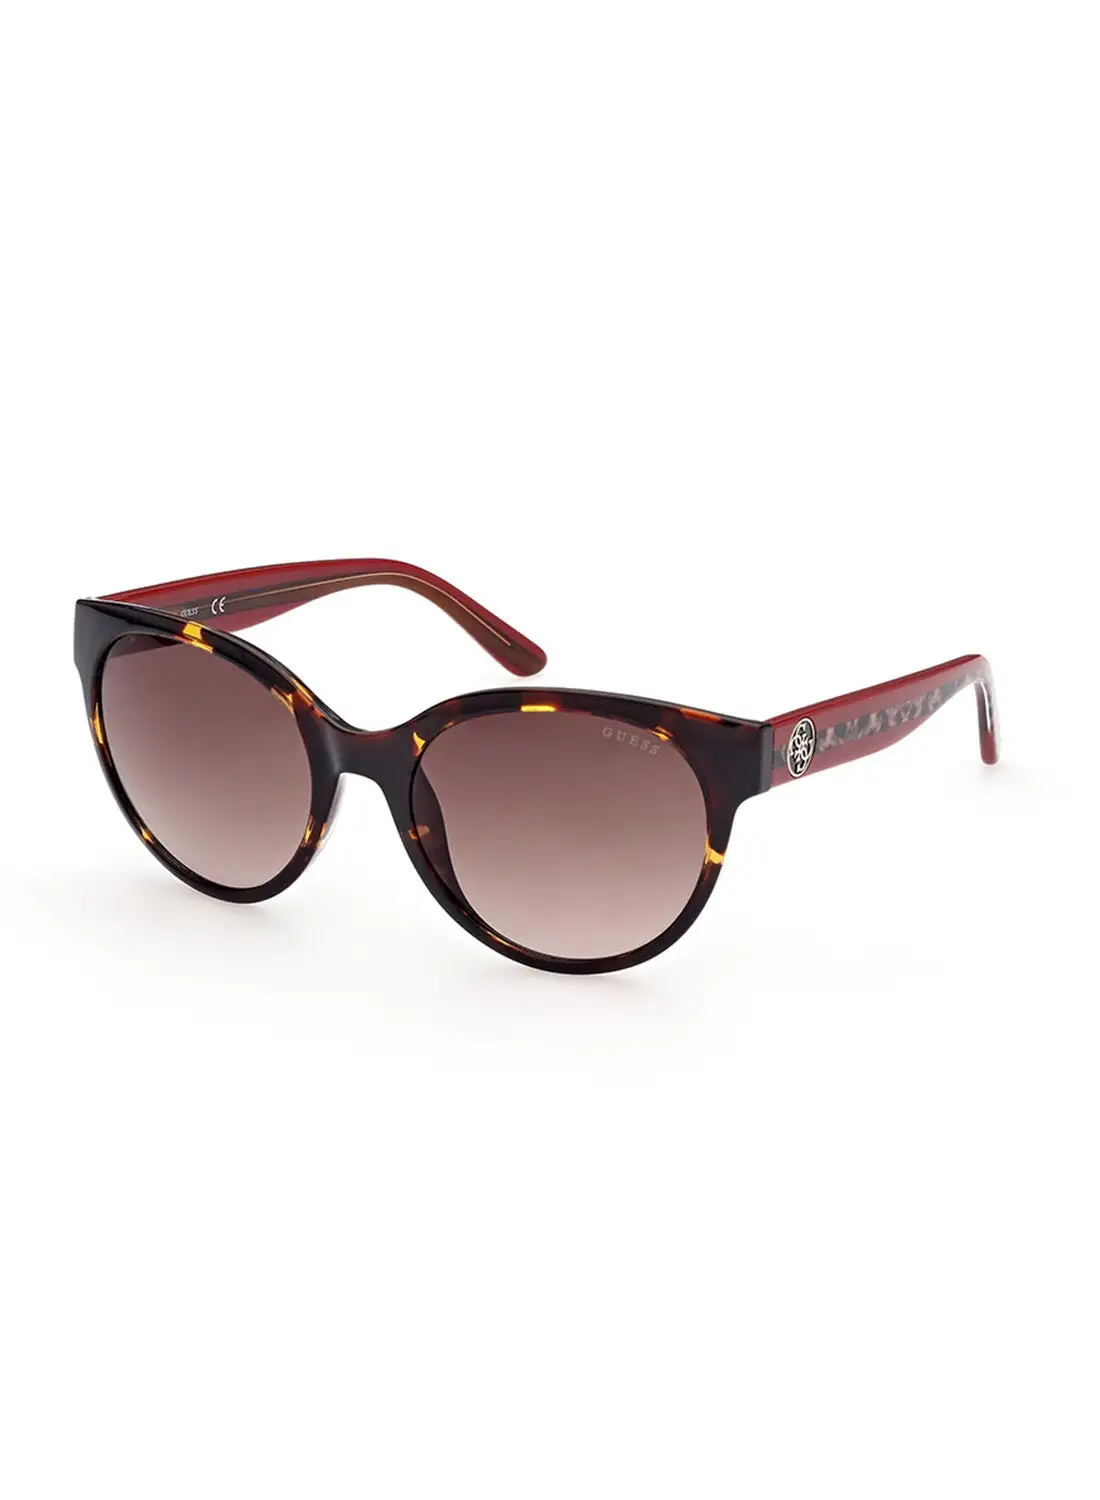 GUESS Women's UV Protection Round Shape Sunglasses - GU782452F55 - Lens Size: 55 Mm